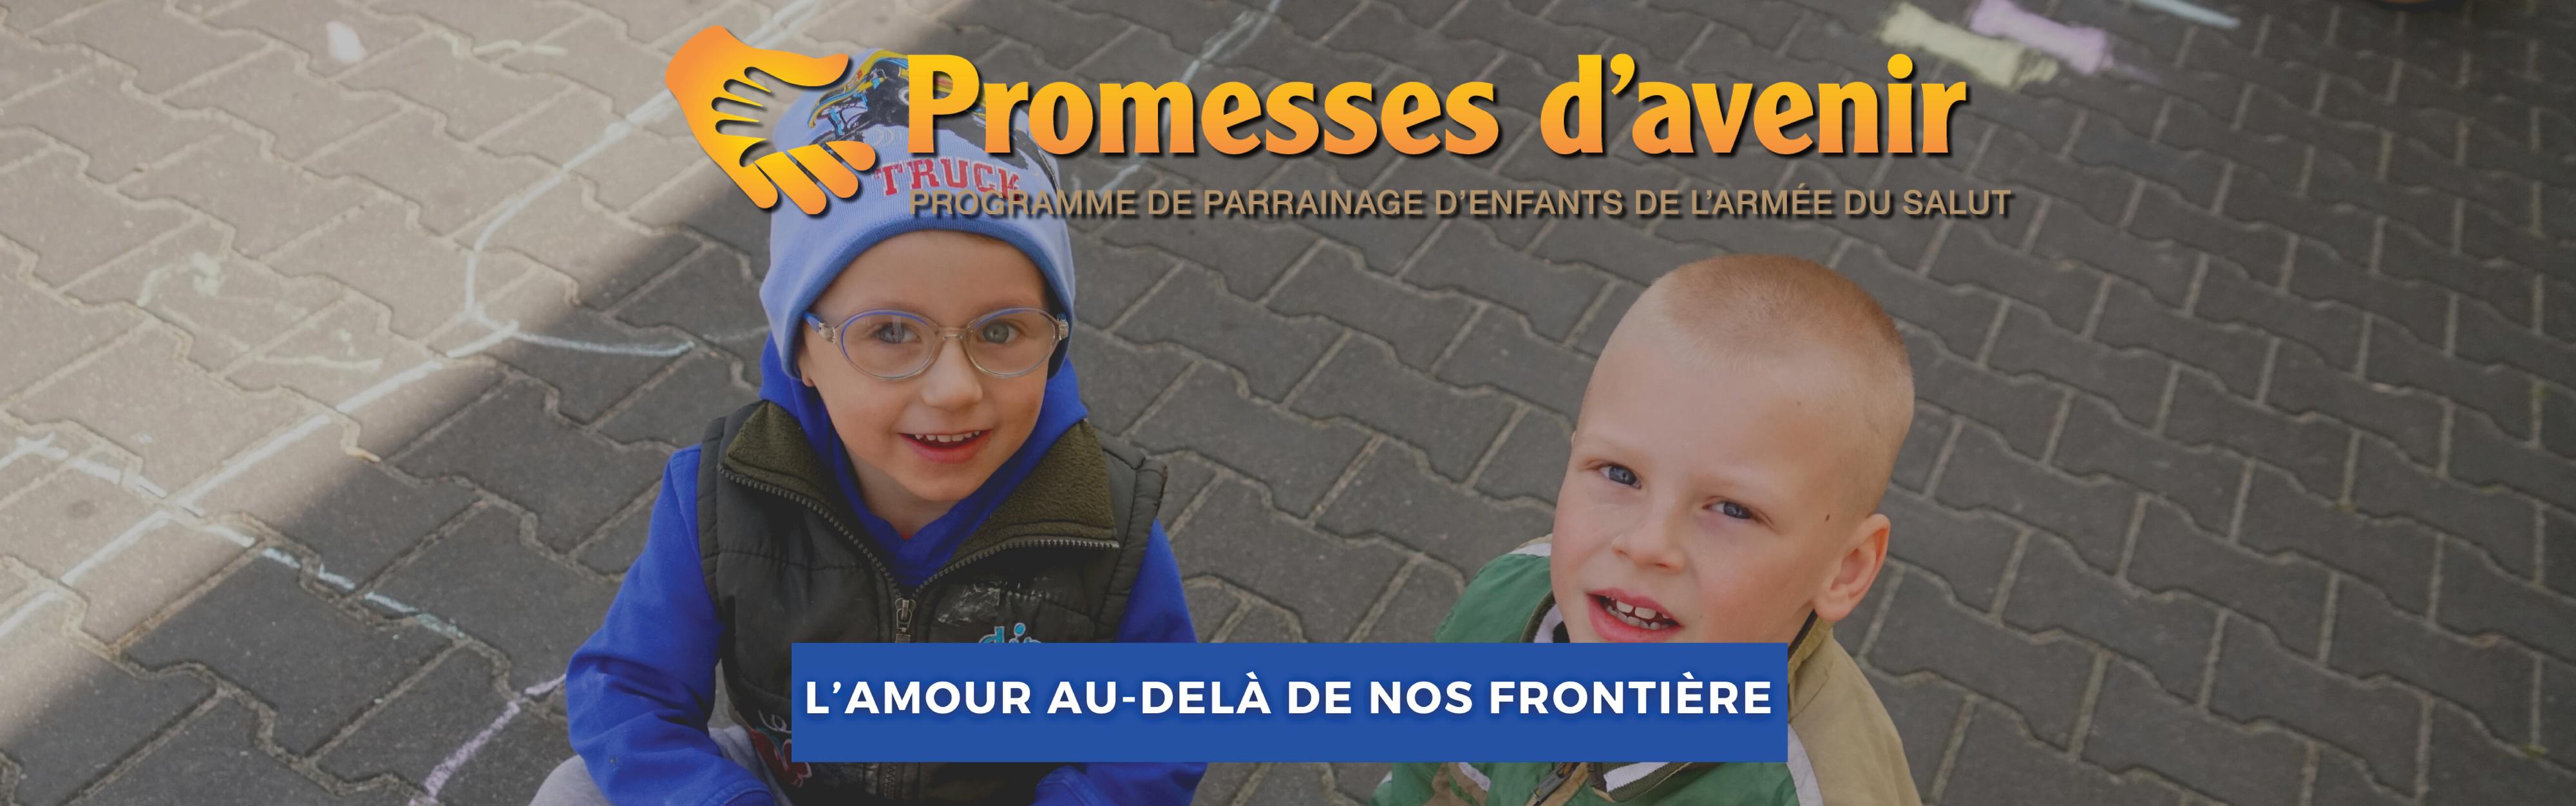 promesses d'avenir un bandeau (Brighter Futures French banner with two boys smiling from Europe)